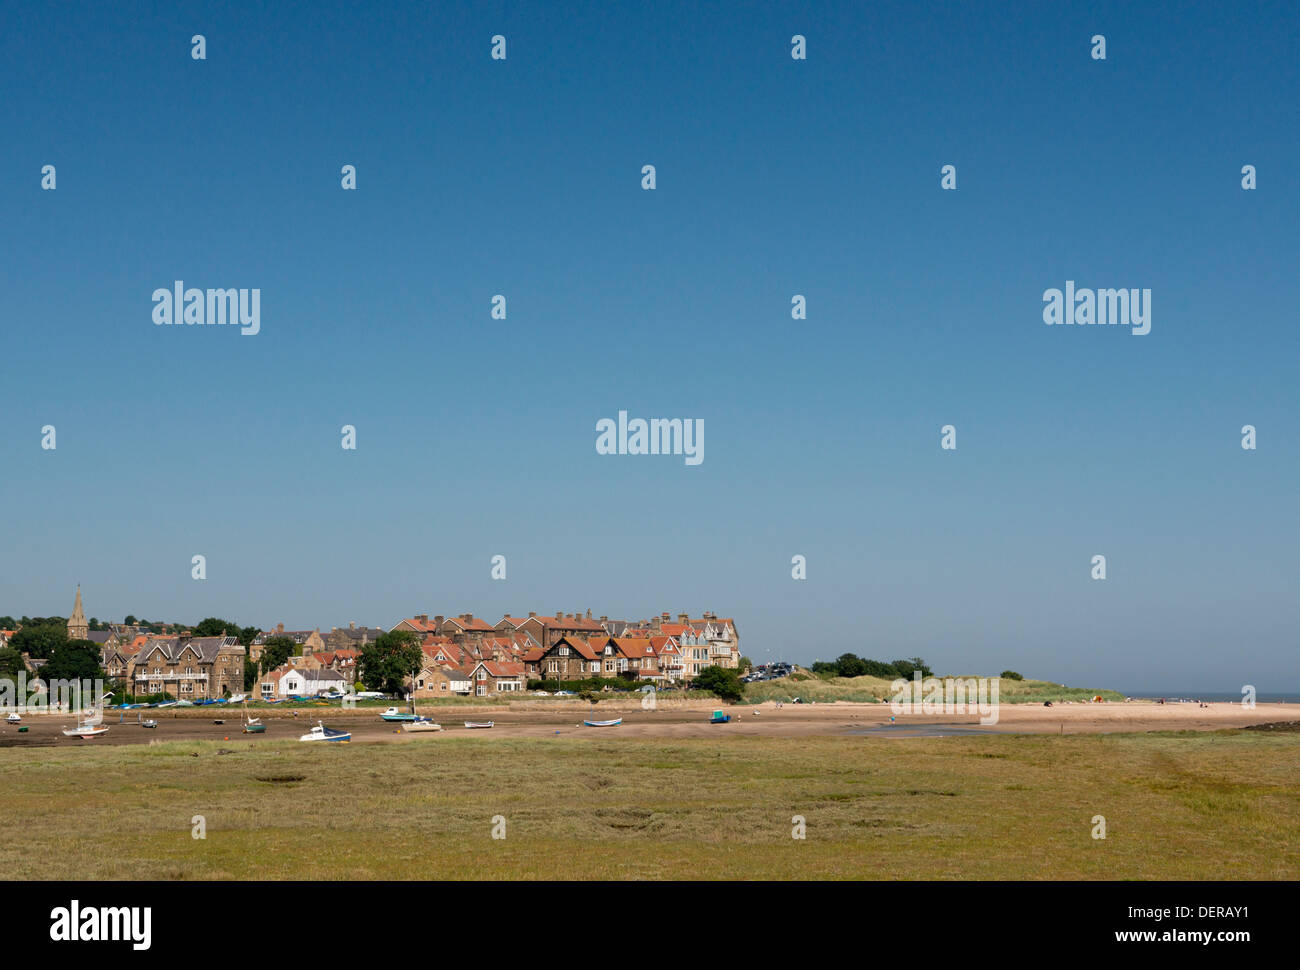 A view of the seaside town of Alnmouth, Northumberland, UK Stock Photo